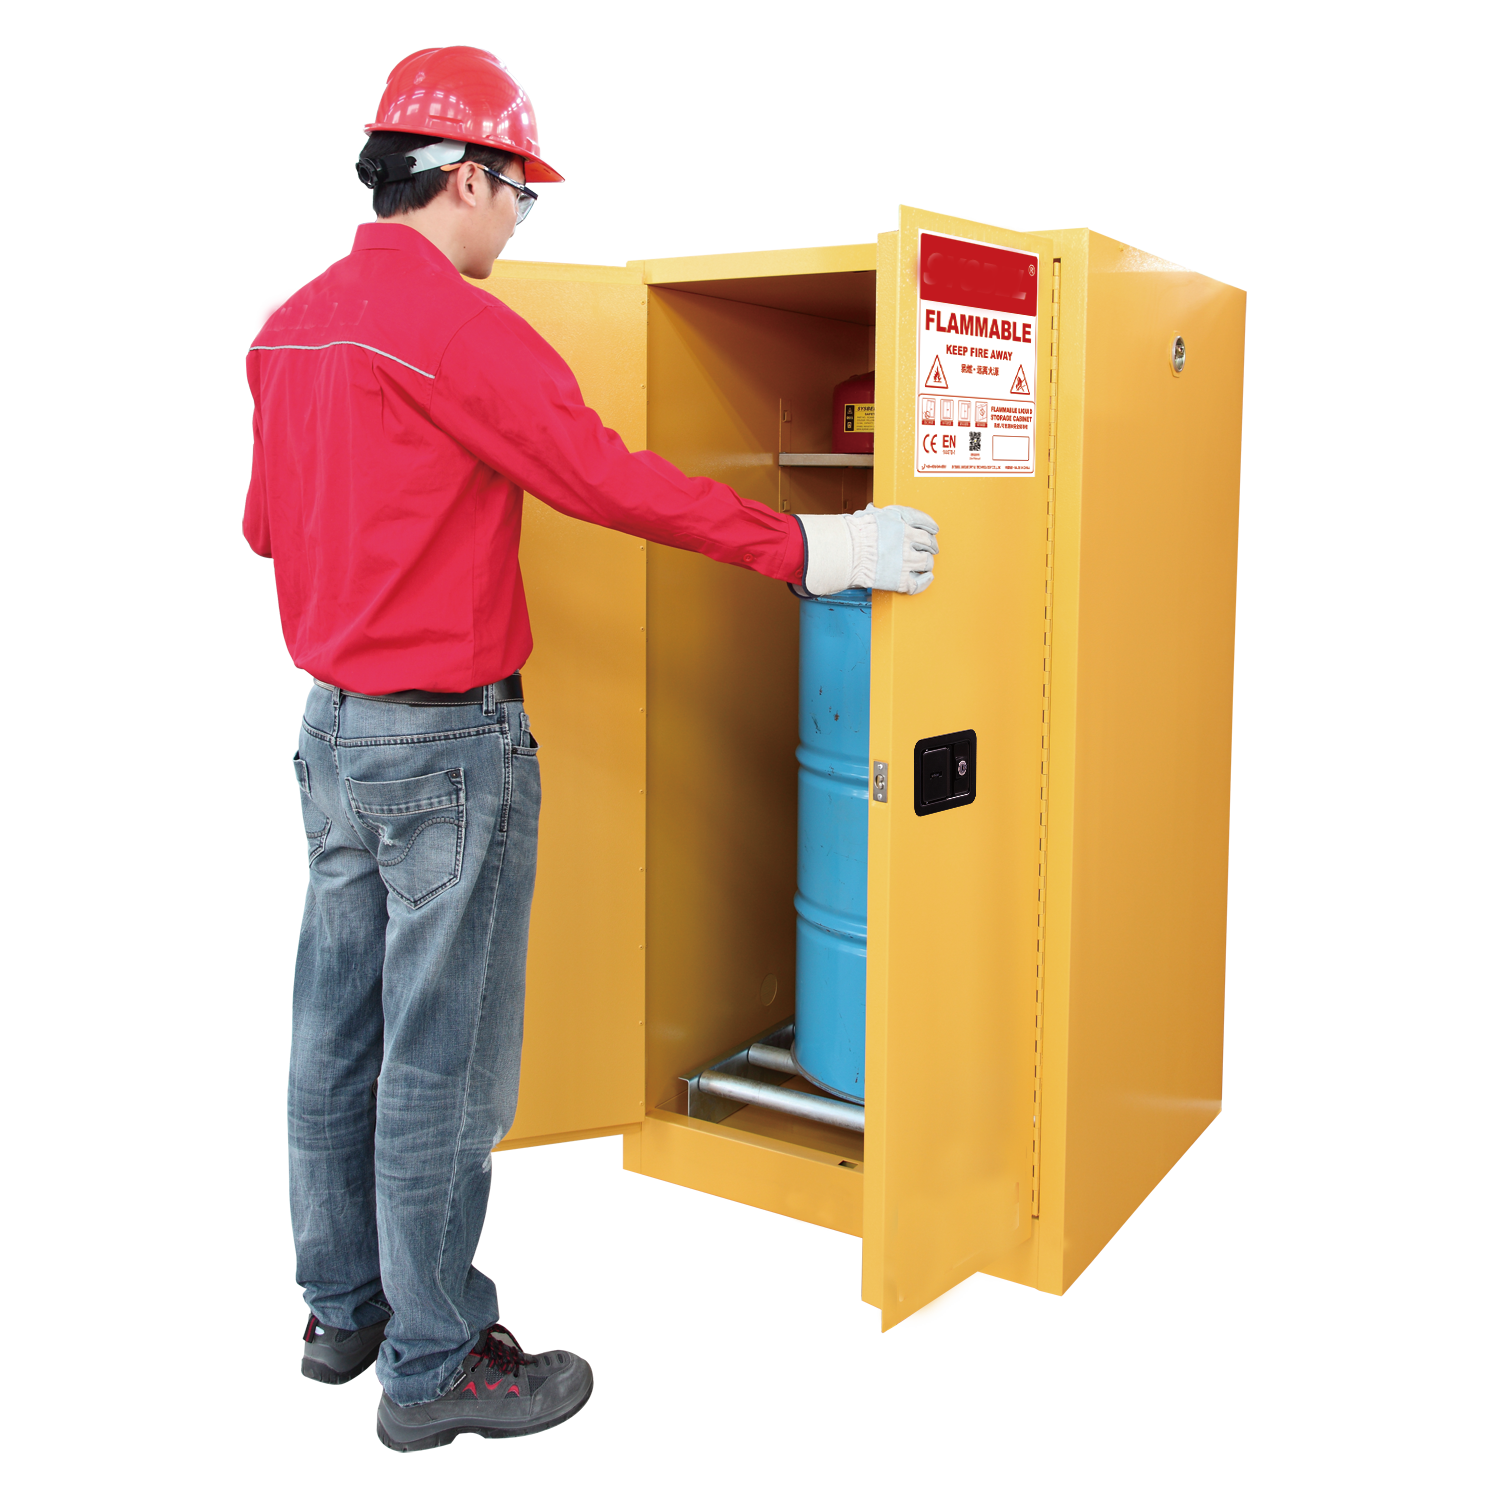 NADE 55Gal Fireproof Flammable Safety Cabinet WA810550